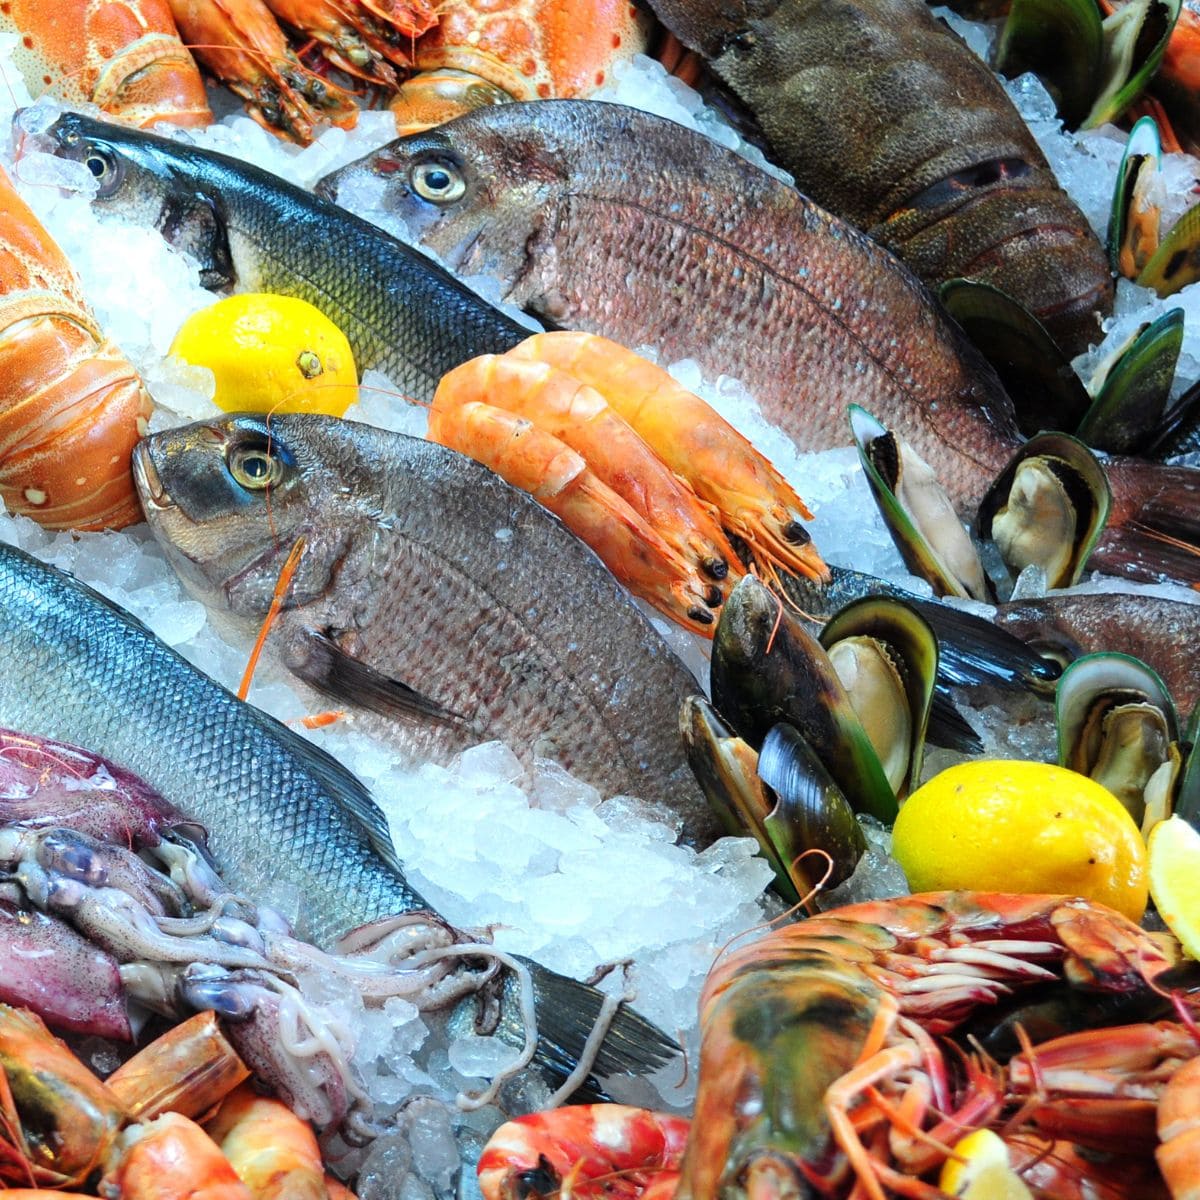 Seafood Markets For Pick Up & Delivery